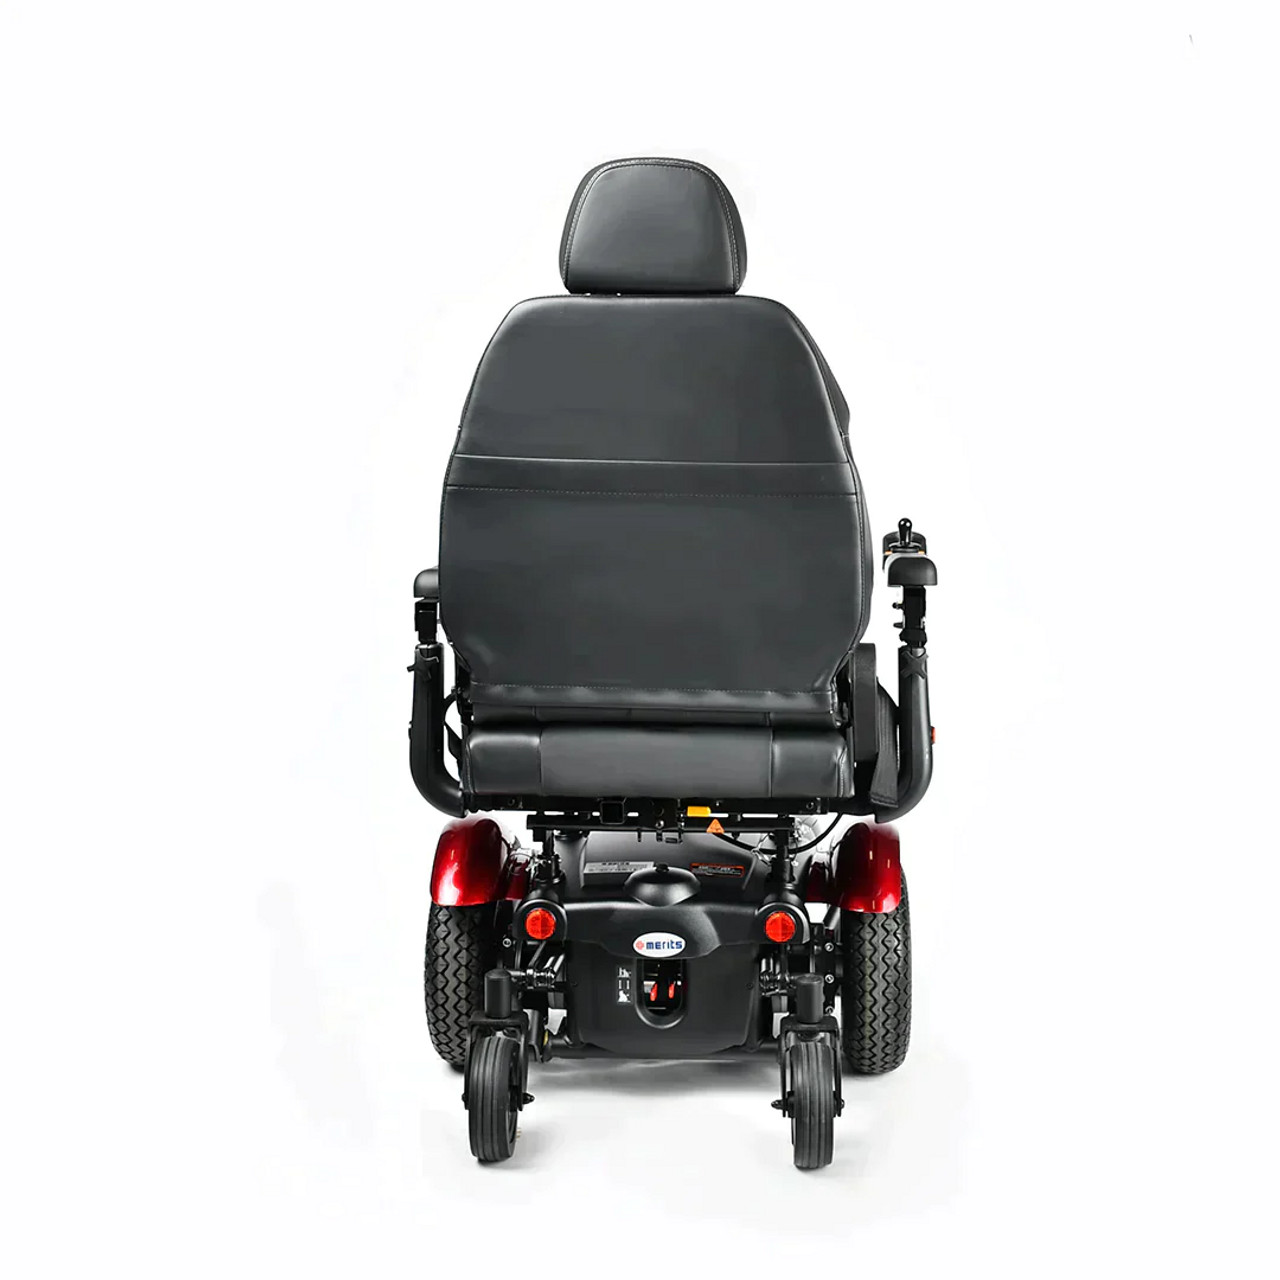 Merits Vision Super Heavy-Duty Power Wheelchair with Lift Seat-Chicken Pieces